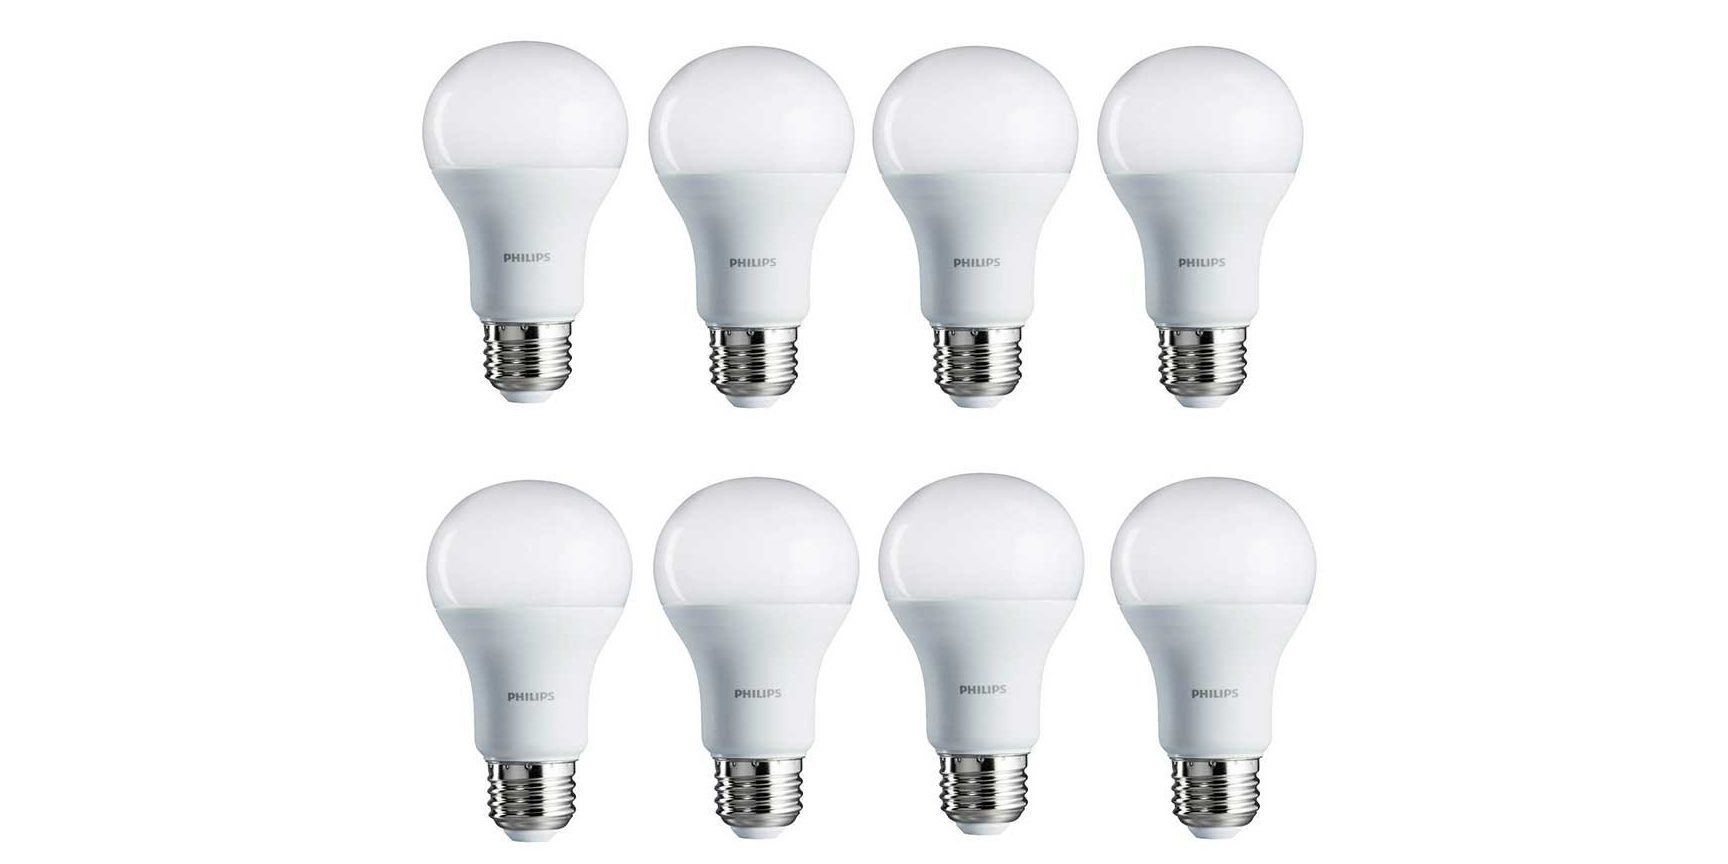 https://electrek.co/wp-content/uploads/sites/3/2017/10/philips-8-pack-led.jpg?quality=82&strip=all